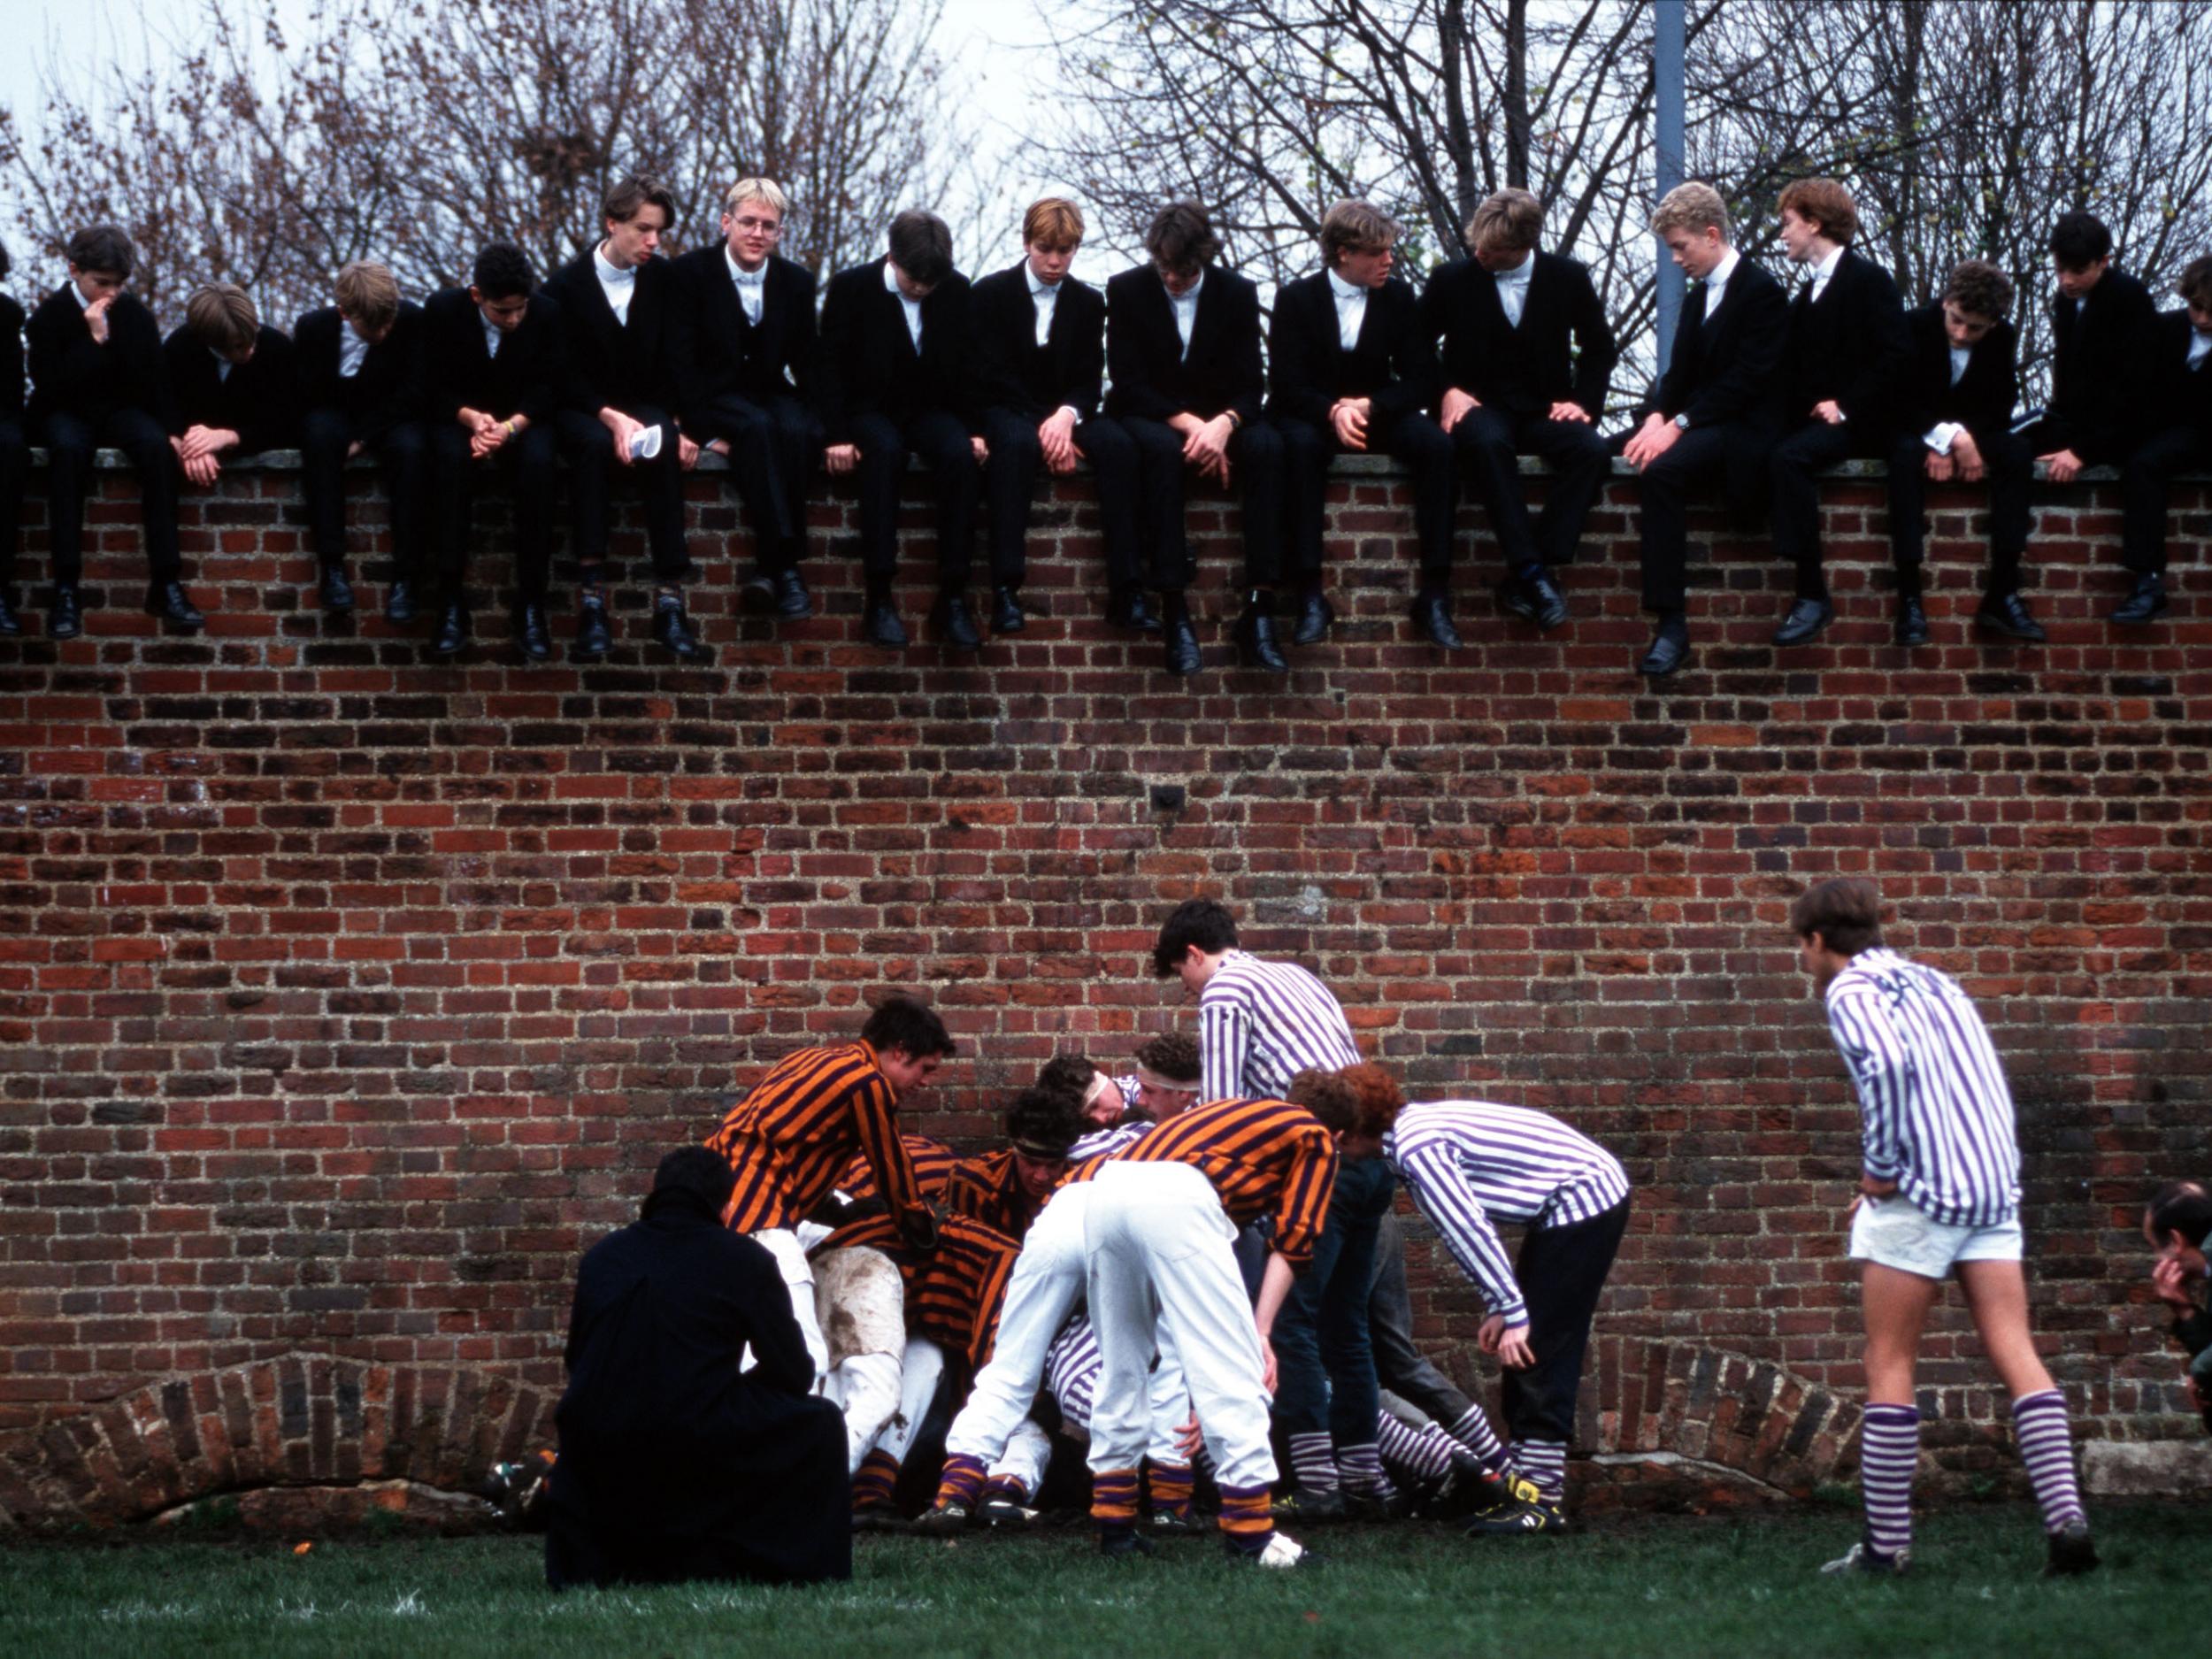 The Eton wall game bears some traits of Rugby Union and is still played to this day